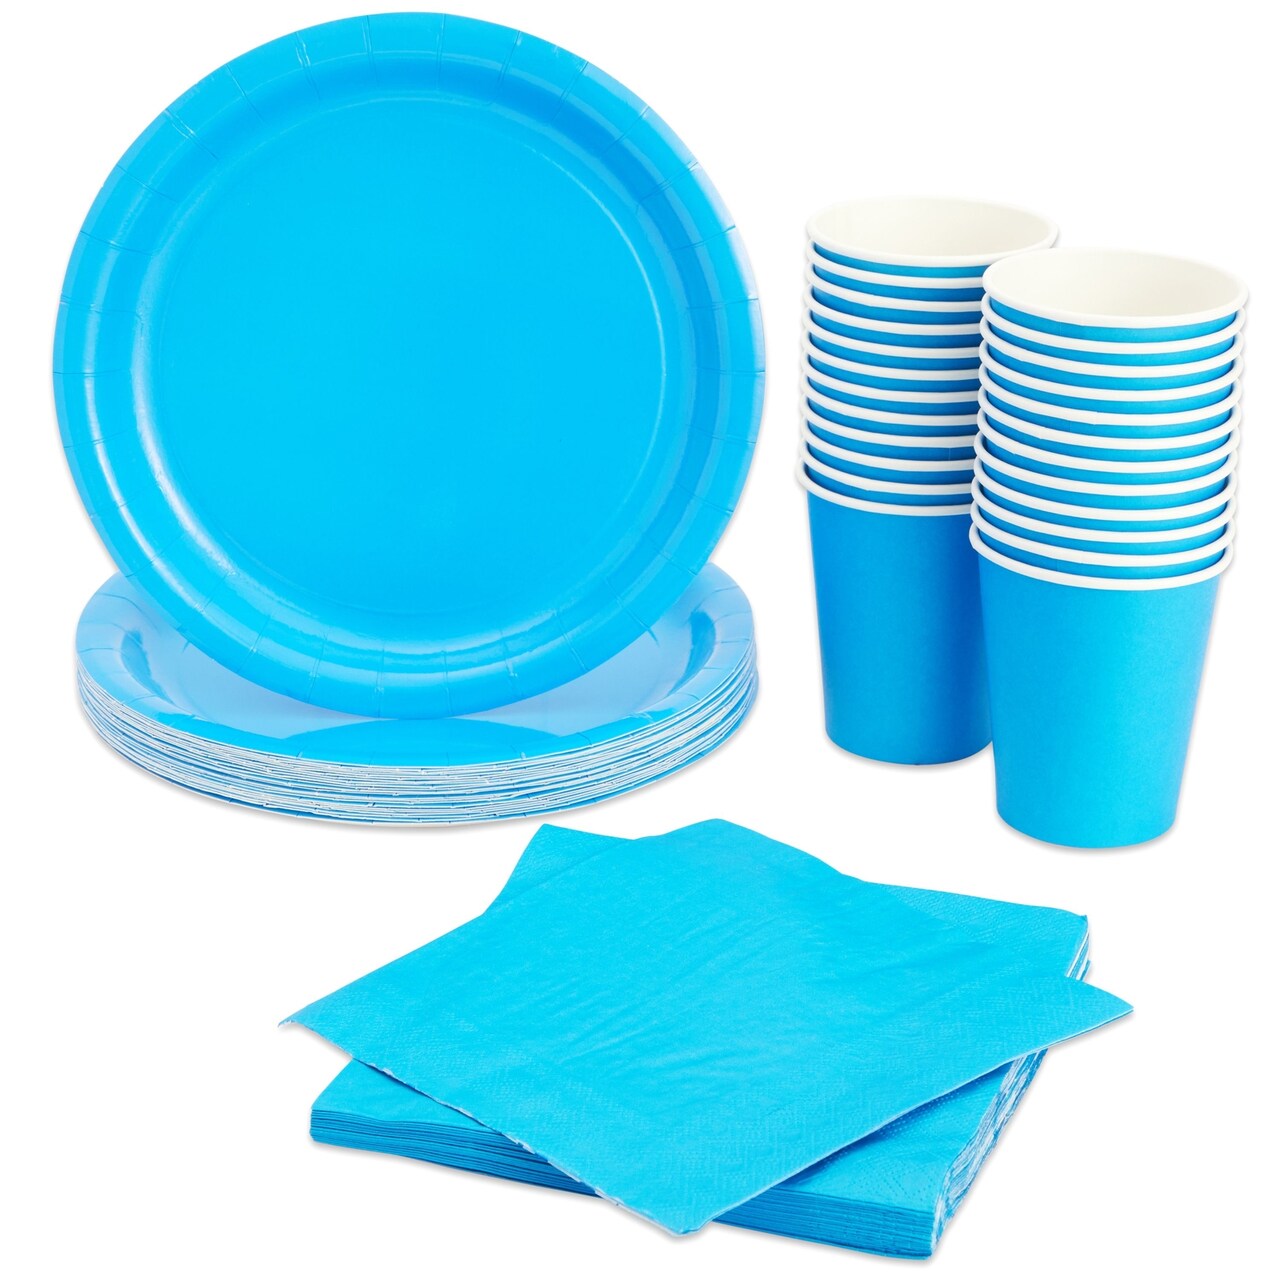 Serves 24 Blue Party Supplies, Disposable Paper Plates, Cups, Napkins for Birthday Party, Graduation, Gender Reveal, Baby Boy Shower, Picnic, Celebration (72 Pieces)